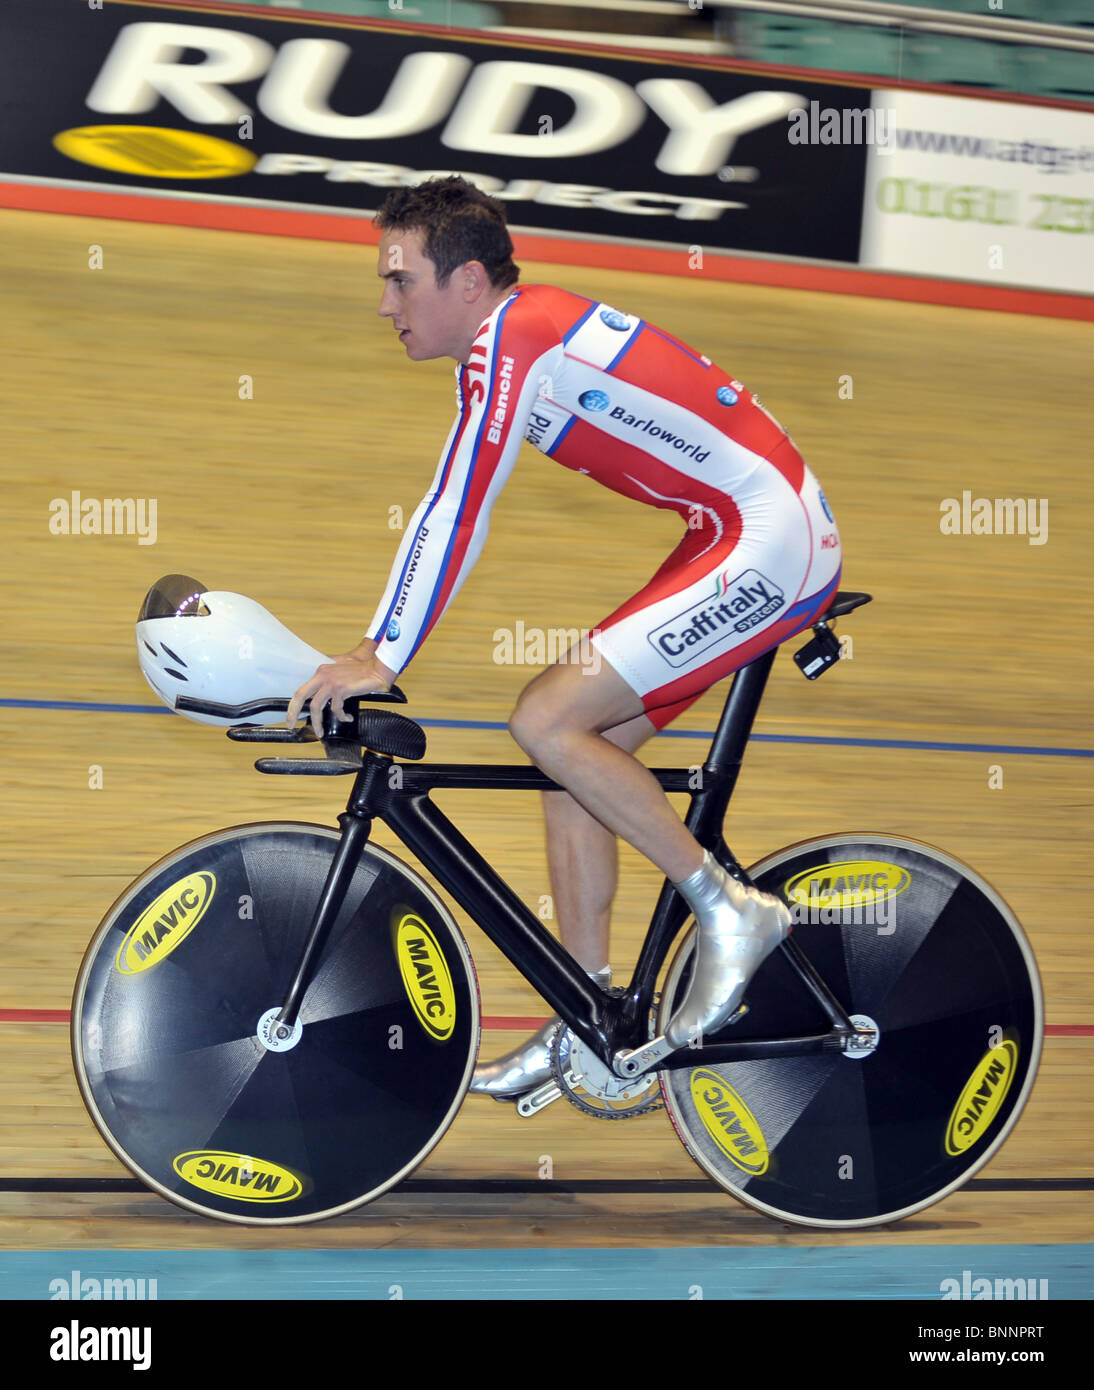 Geraint Thomas (Barloworld). 4km Pursuit Qualifiers. Thursday Afternoon Session. British Cycling Senior National Track Champ. Stock Photo